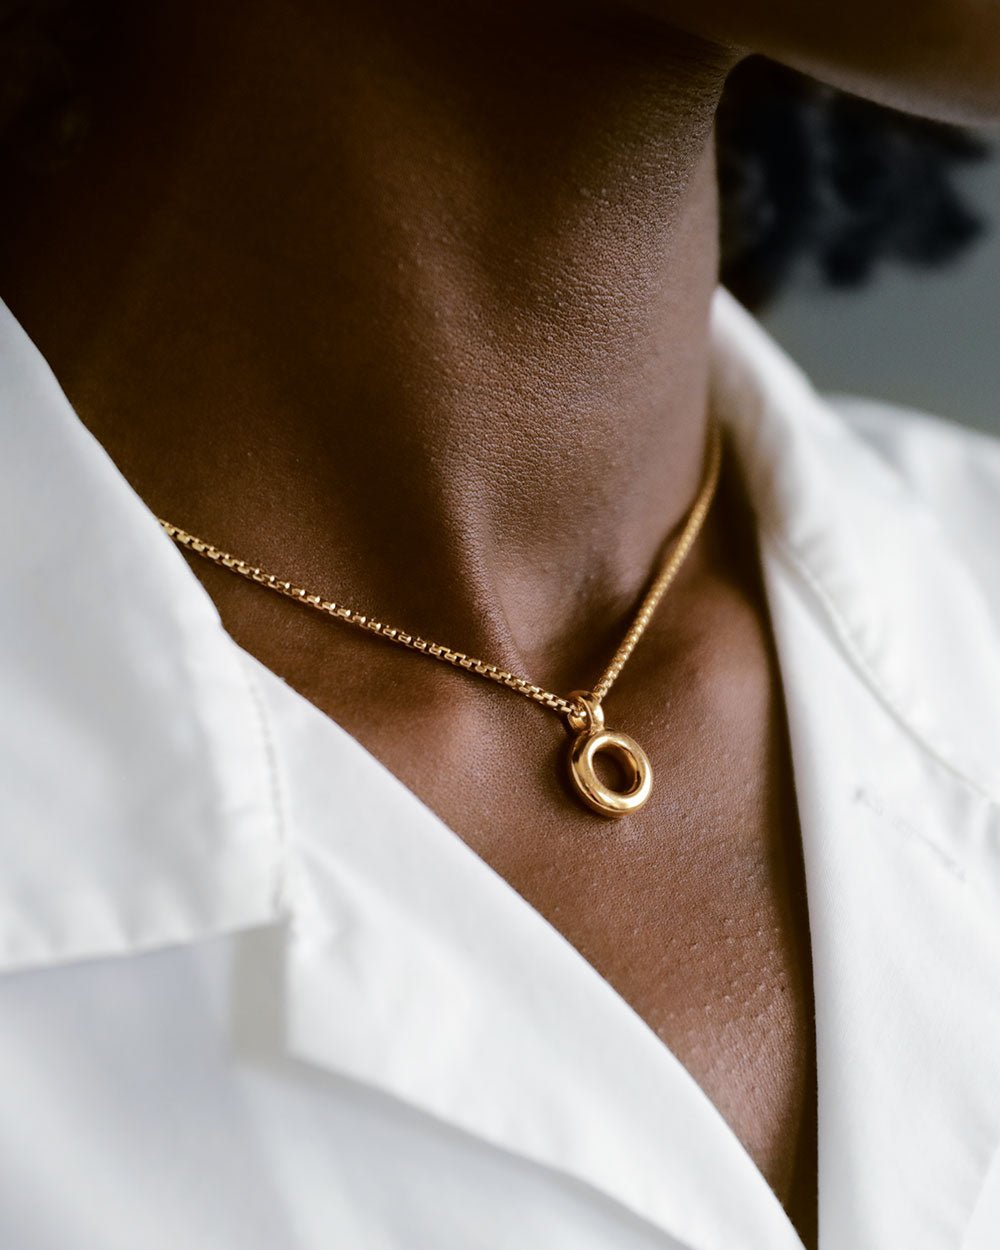 Woman's neck and white collared shirt with a 14k solid yellow gold box chain with yellow 18k gold donut pendant by George Rings in size 16" with a lobster clasp.